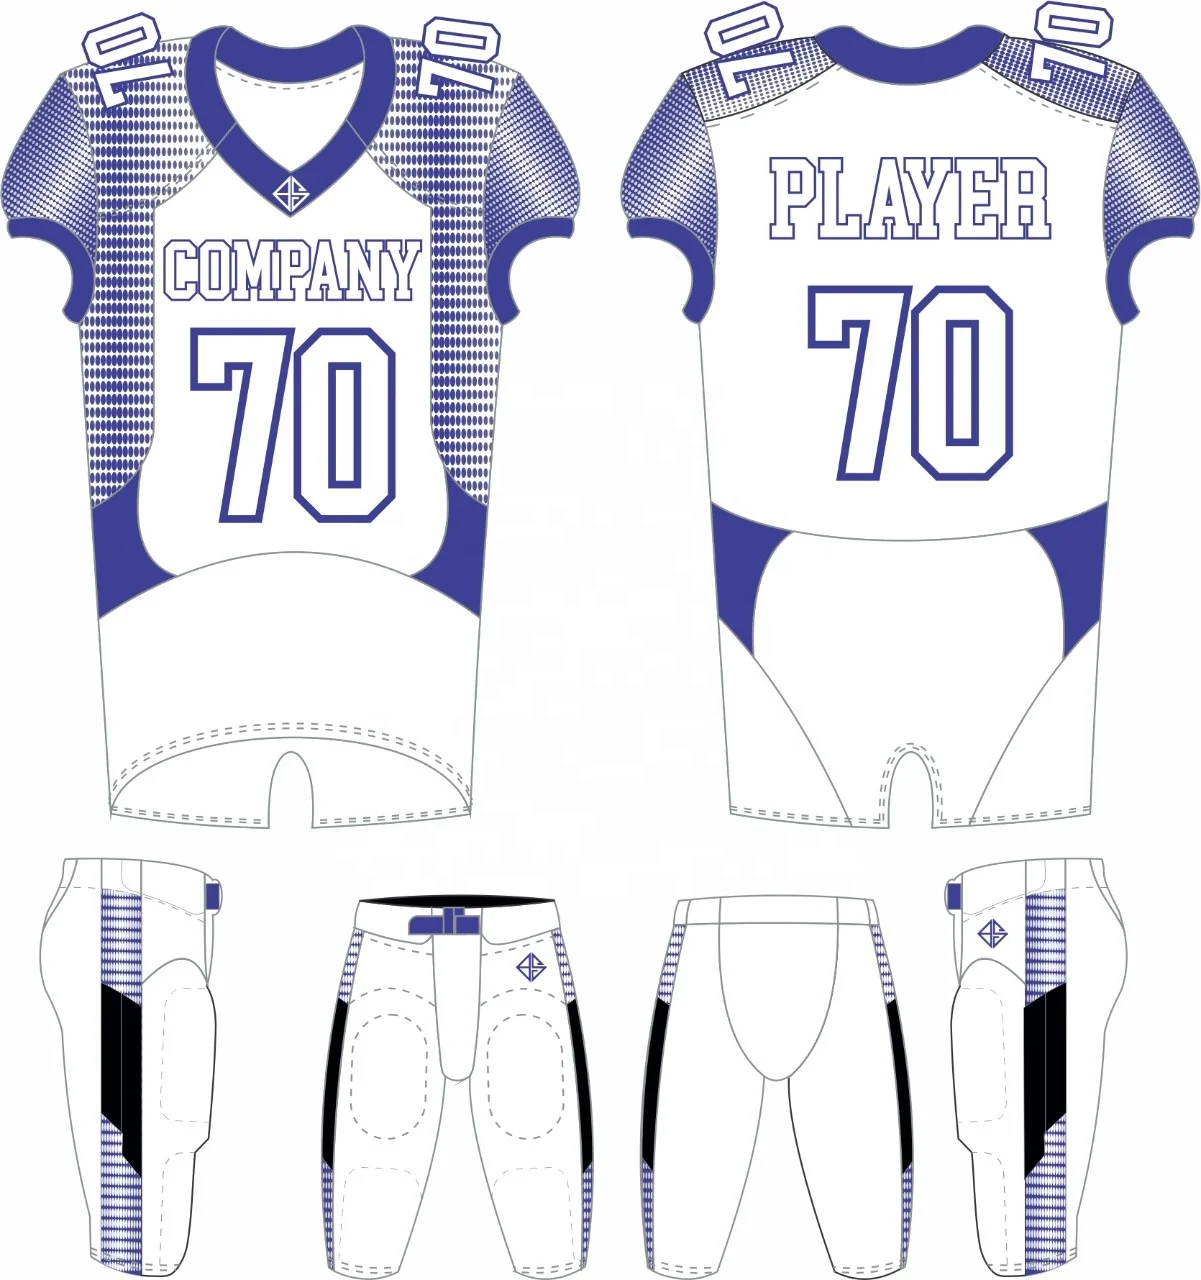 Control Series - Adult/Youth Victory Semi-Pro Custom Sublimated Football  Jersey - All Sports Uniforms